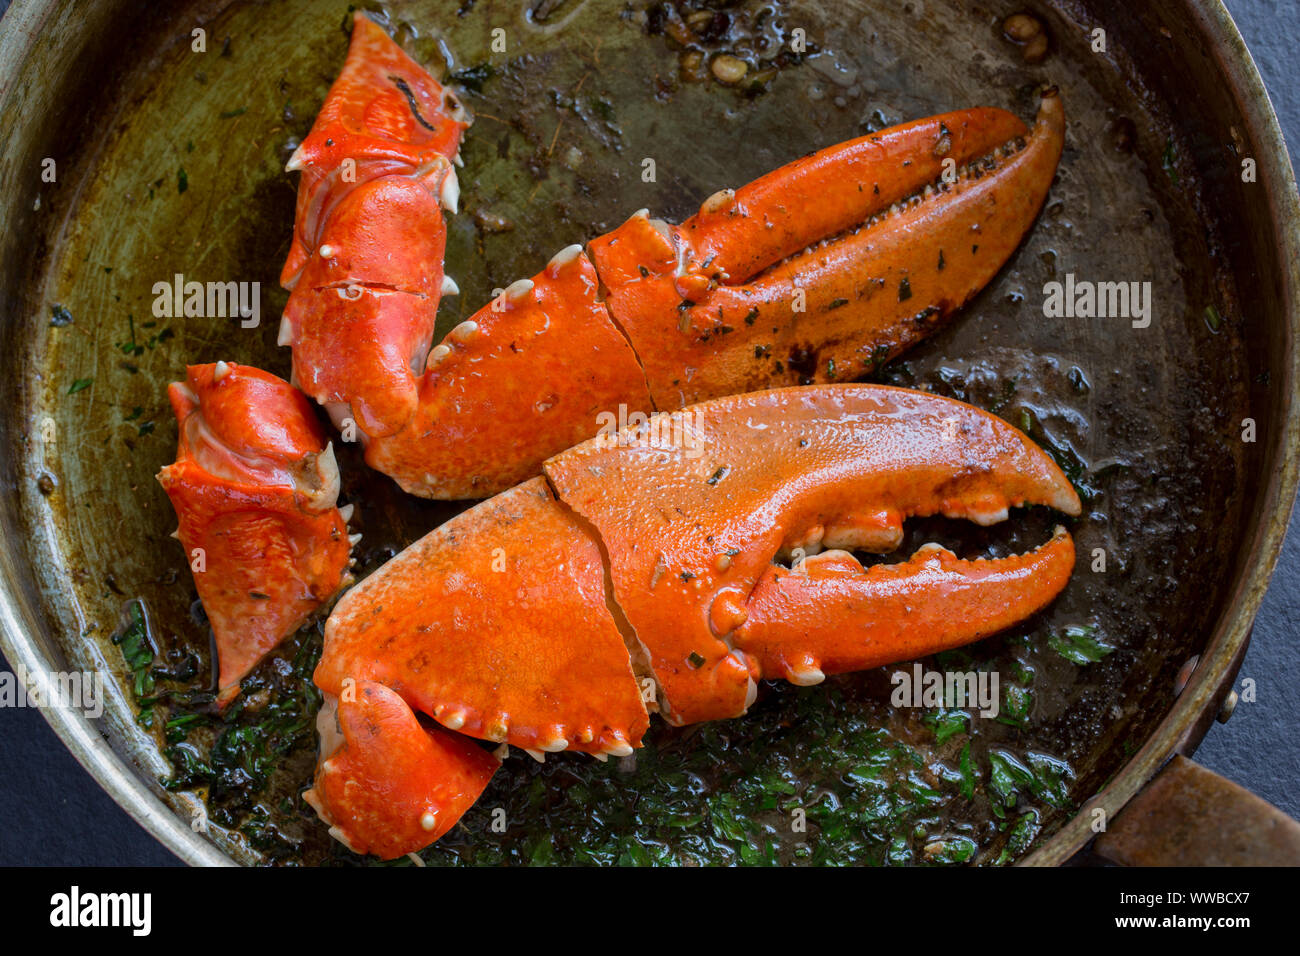 Two boiled, cooked lobster claws from a common lobster, Homarus gammarus, that are being heated in a butter, parsley and garlic sauce in a copper fryi Stock Photo